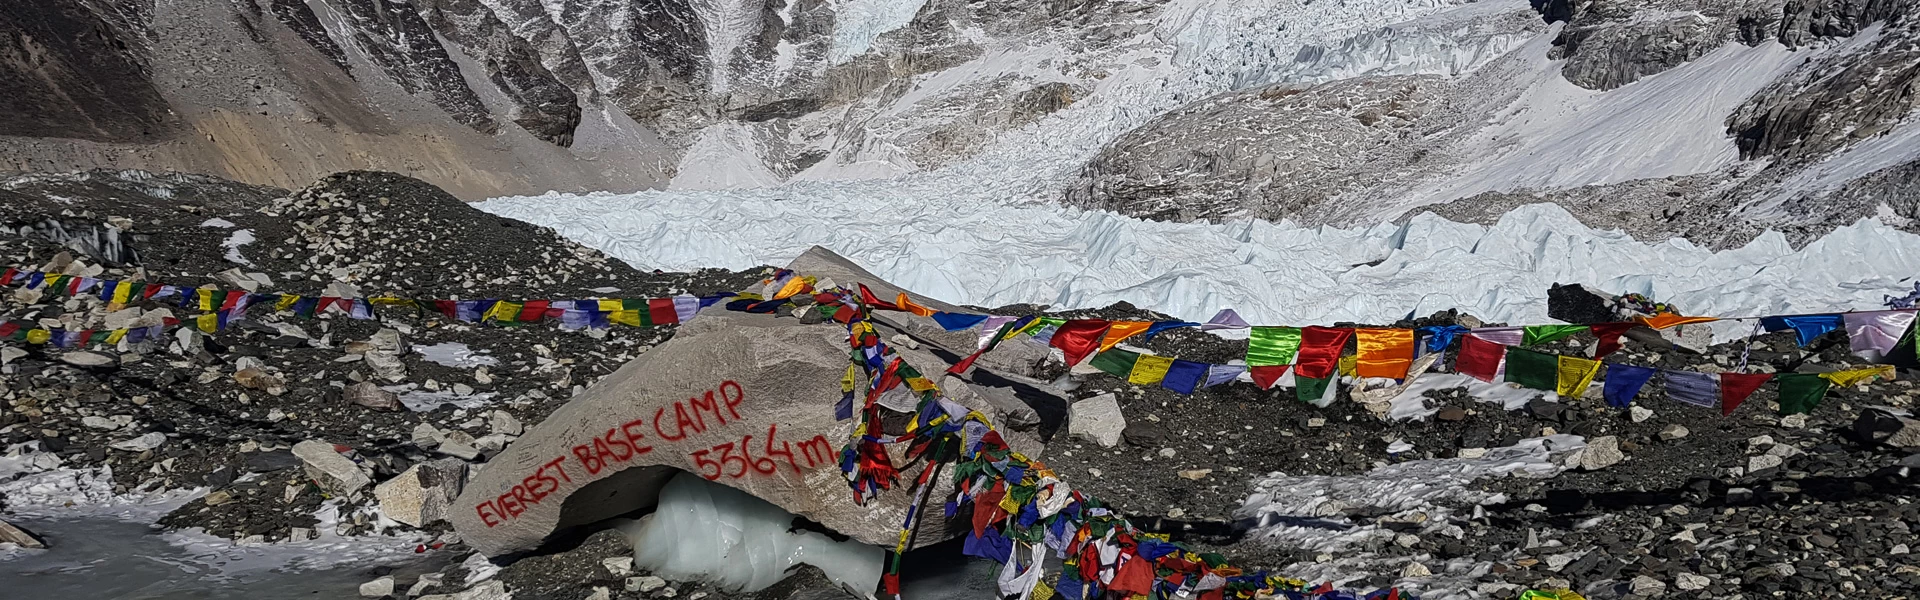 At Everest base camp and it's landmark.